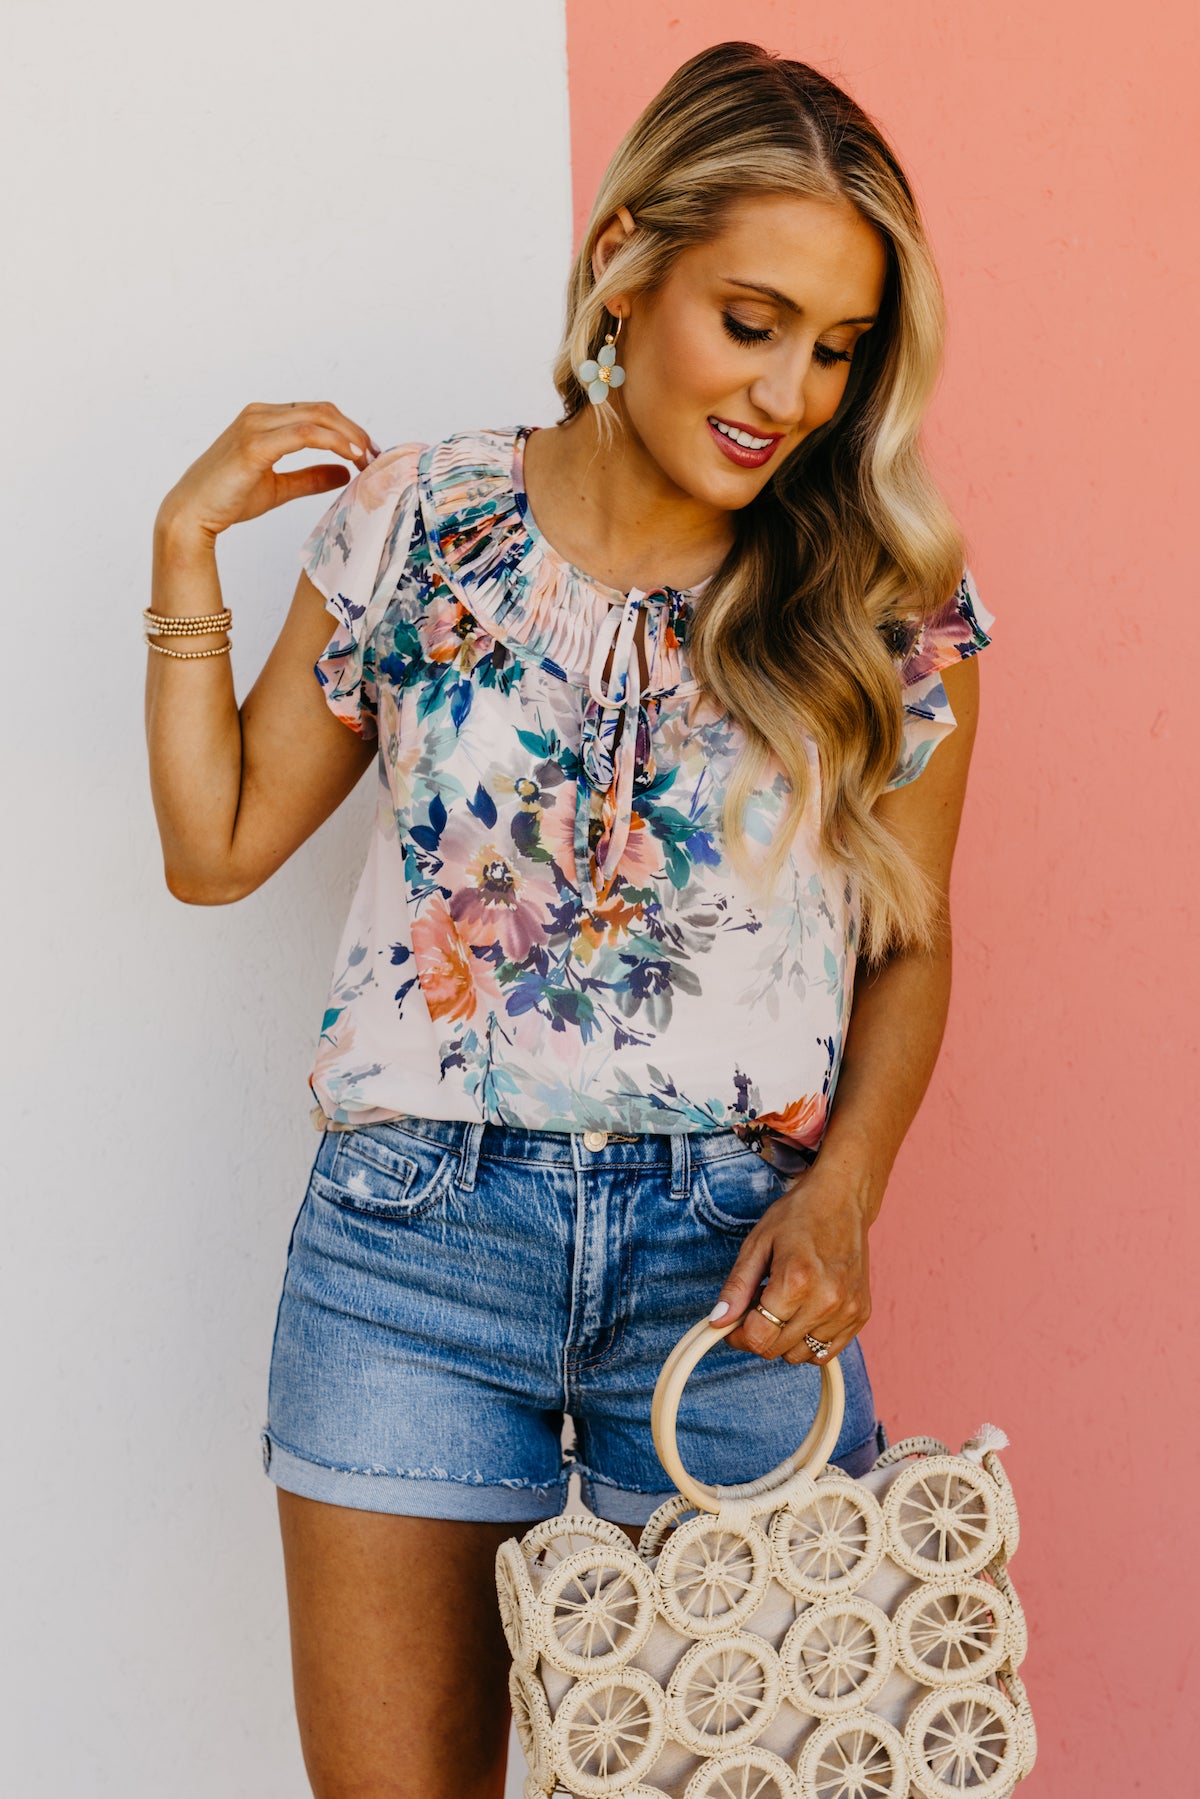 The Karina Floral Tie Front Blouse